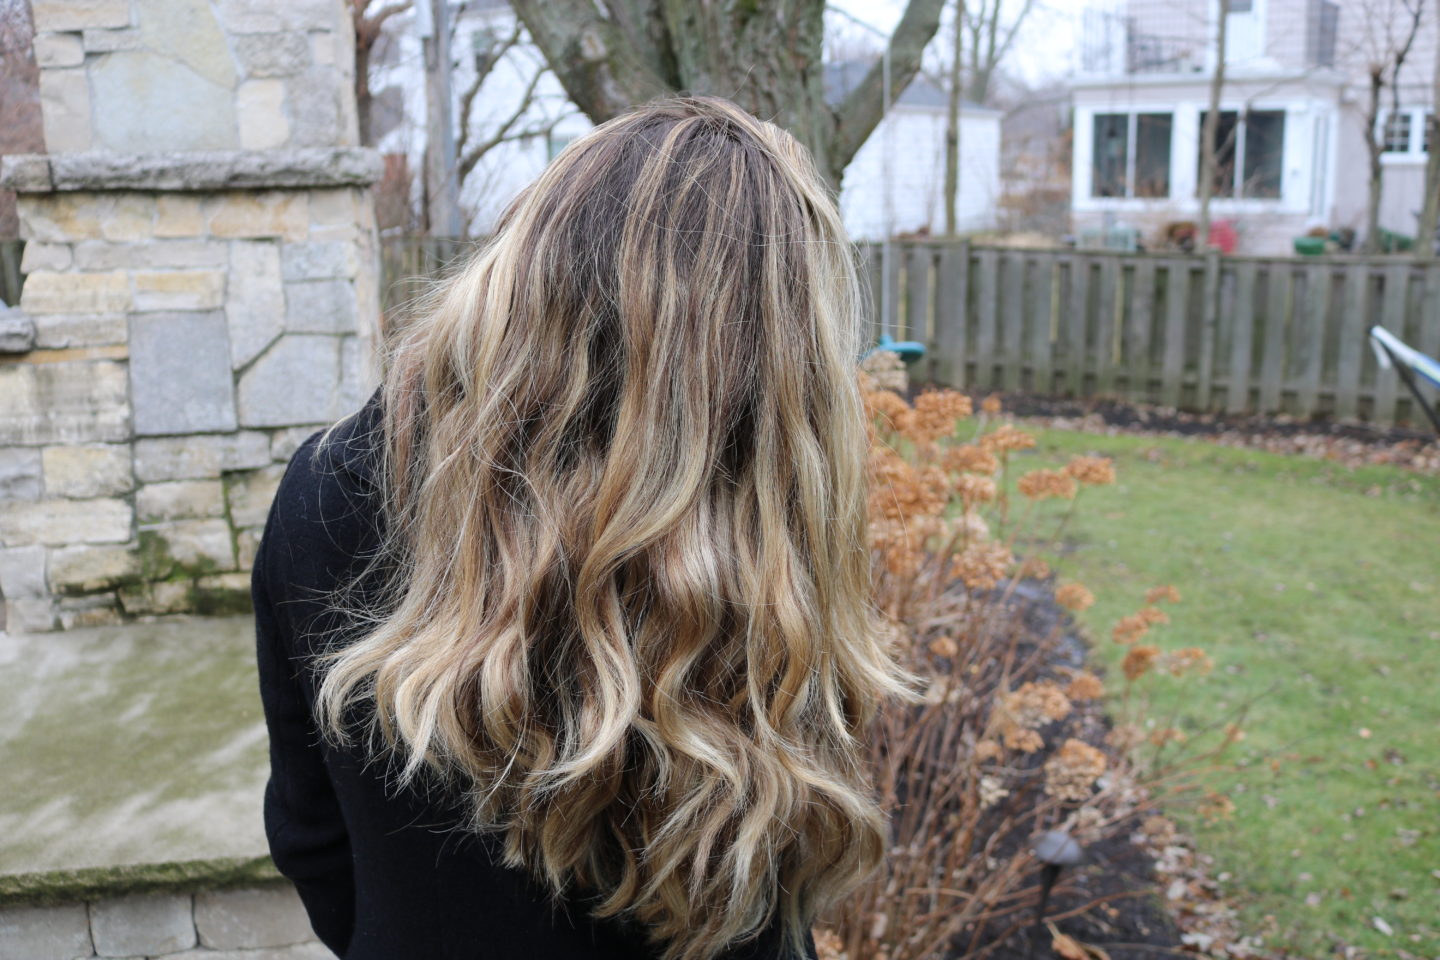 Beachy waves, made easy peachy! No tools required.